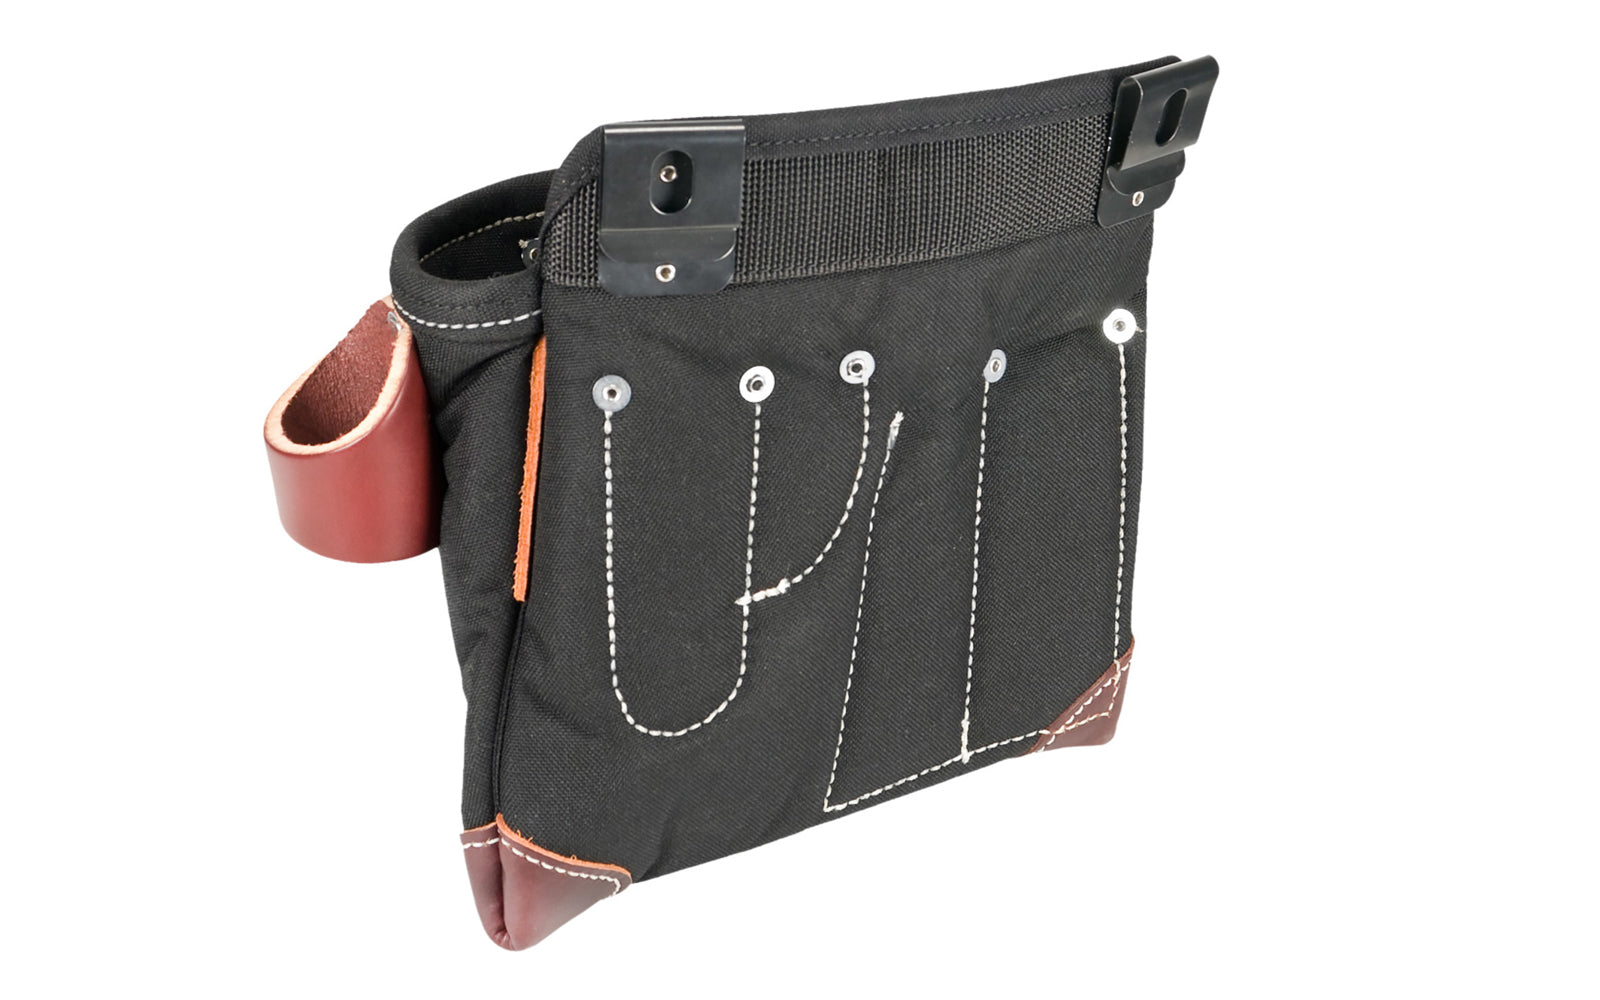 Occidental Leather Builders' Vest Clip On Tool Bag ~ Model 8517 - Occidental Leather clip-on tool bag features holders for pencils, work knife, chisel, level, lumber crayon, plus a heavy duty hammer loop. Designed to fit the Builders' Vest No. 2535. Made of industrial nylon material & genuine leather. 759244275308